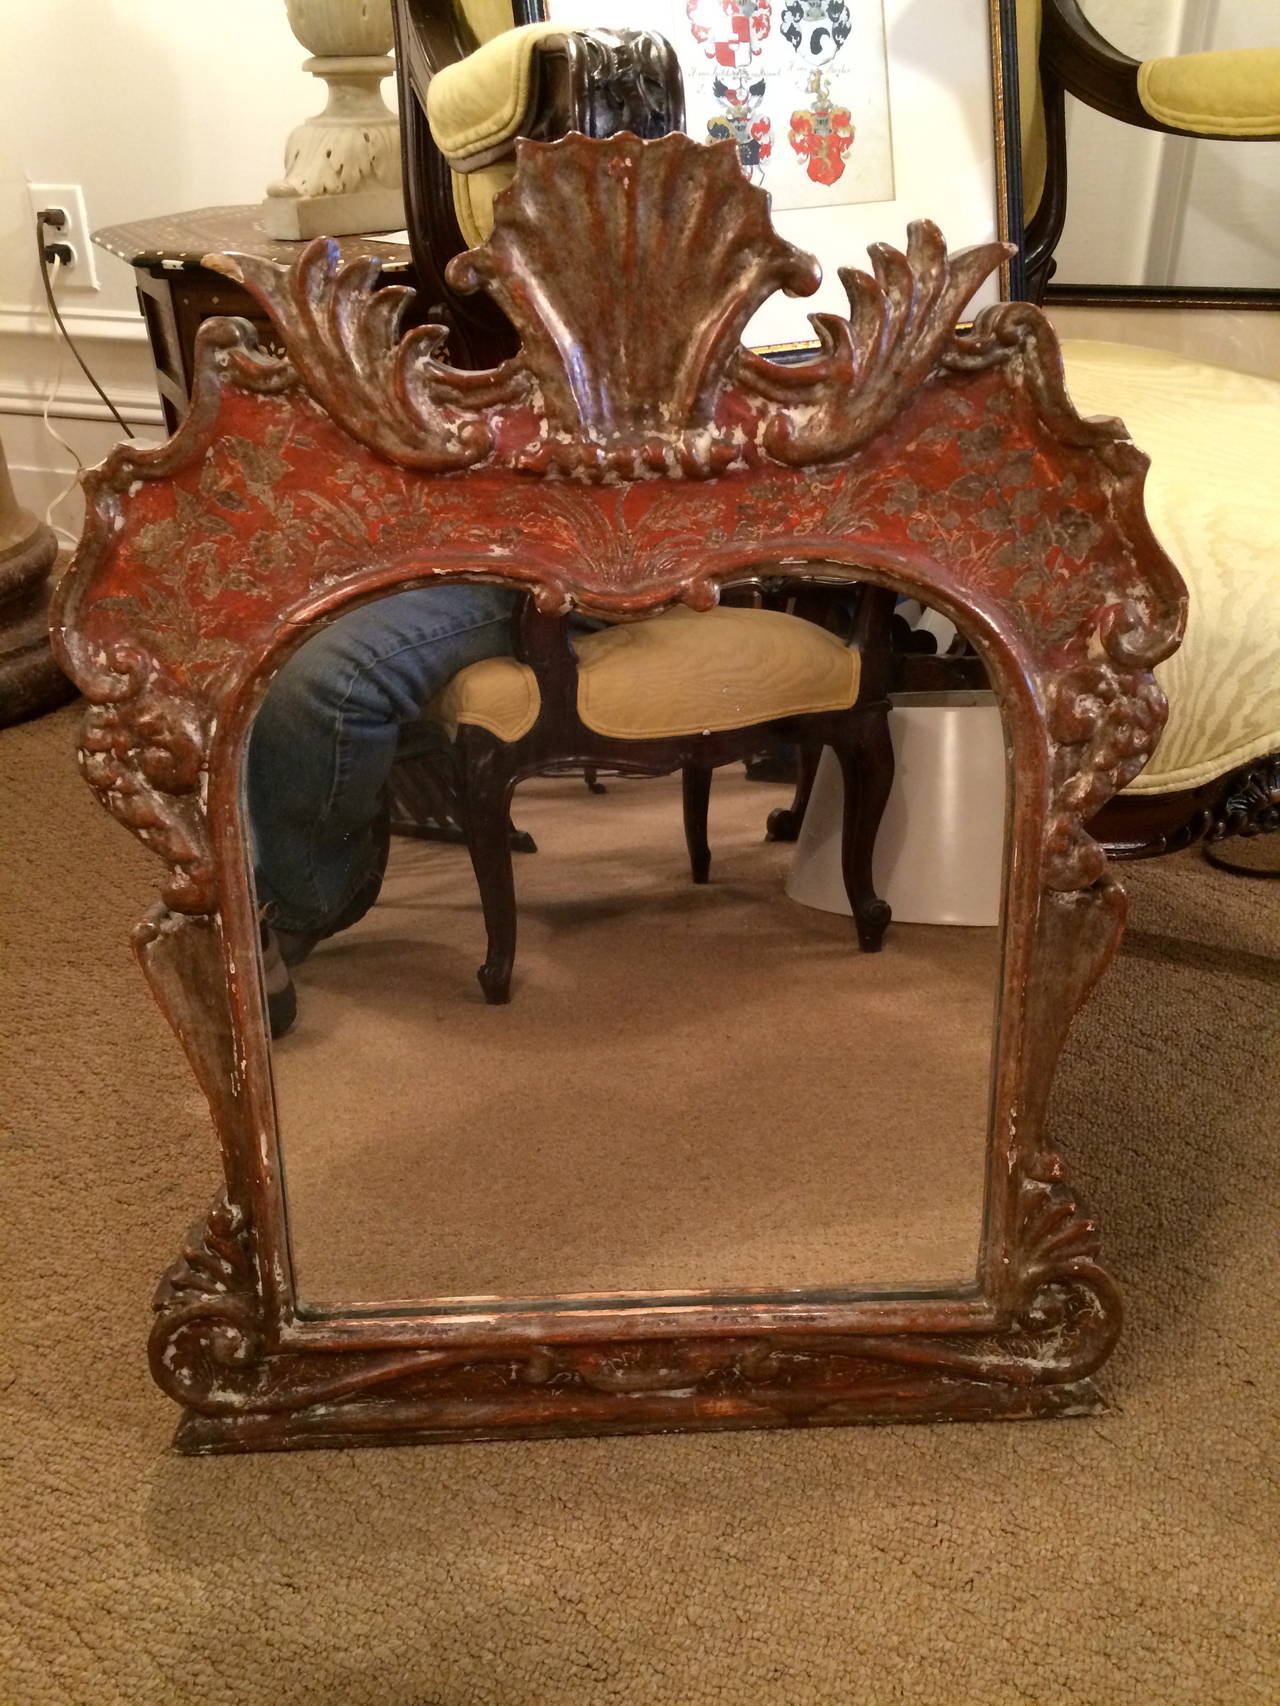 Elegant and charming Italian Rococo style Venetian red and silver gilt mirror with etched floral and arabesques surrounding a central shell motif.